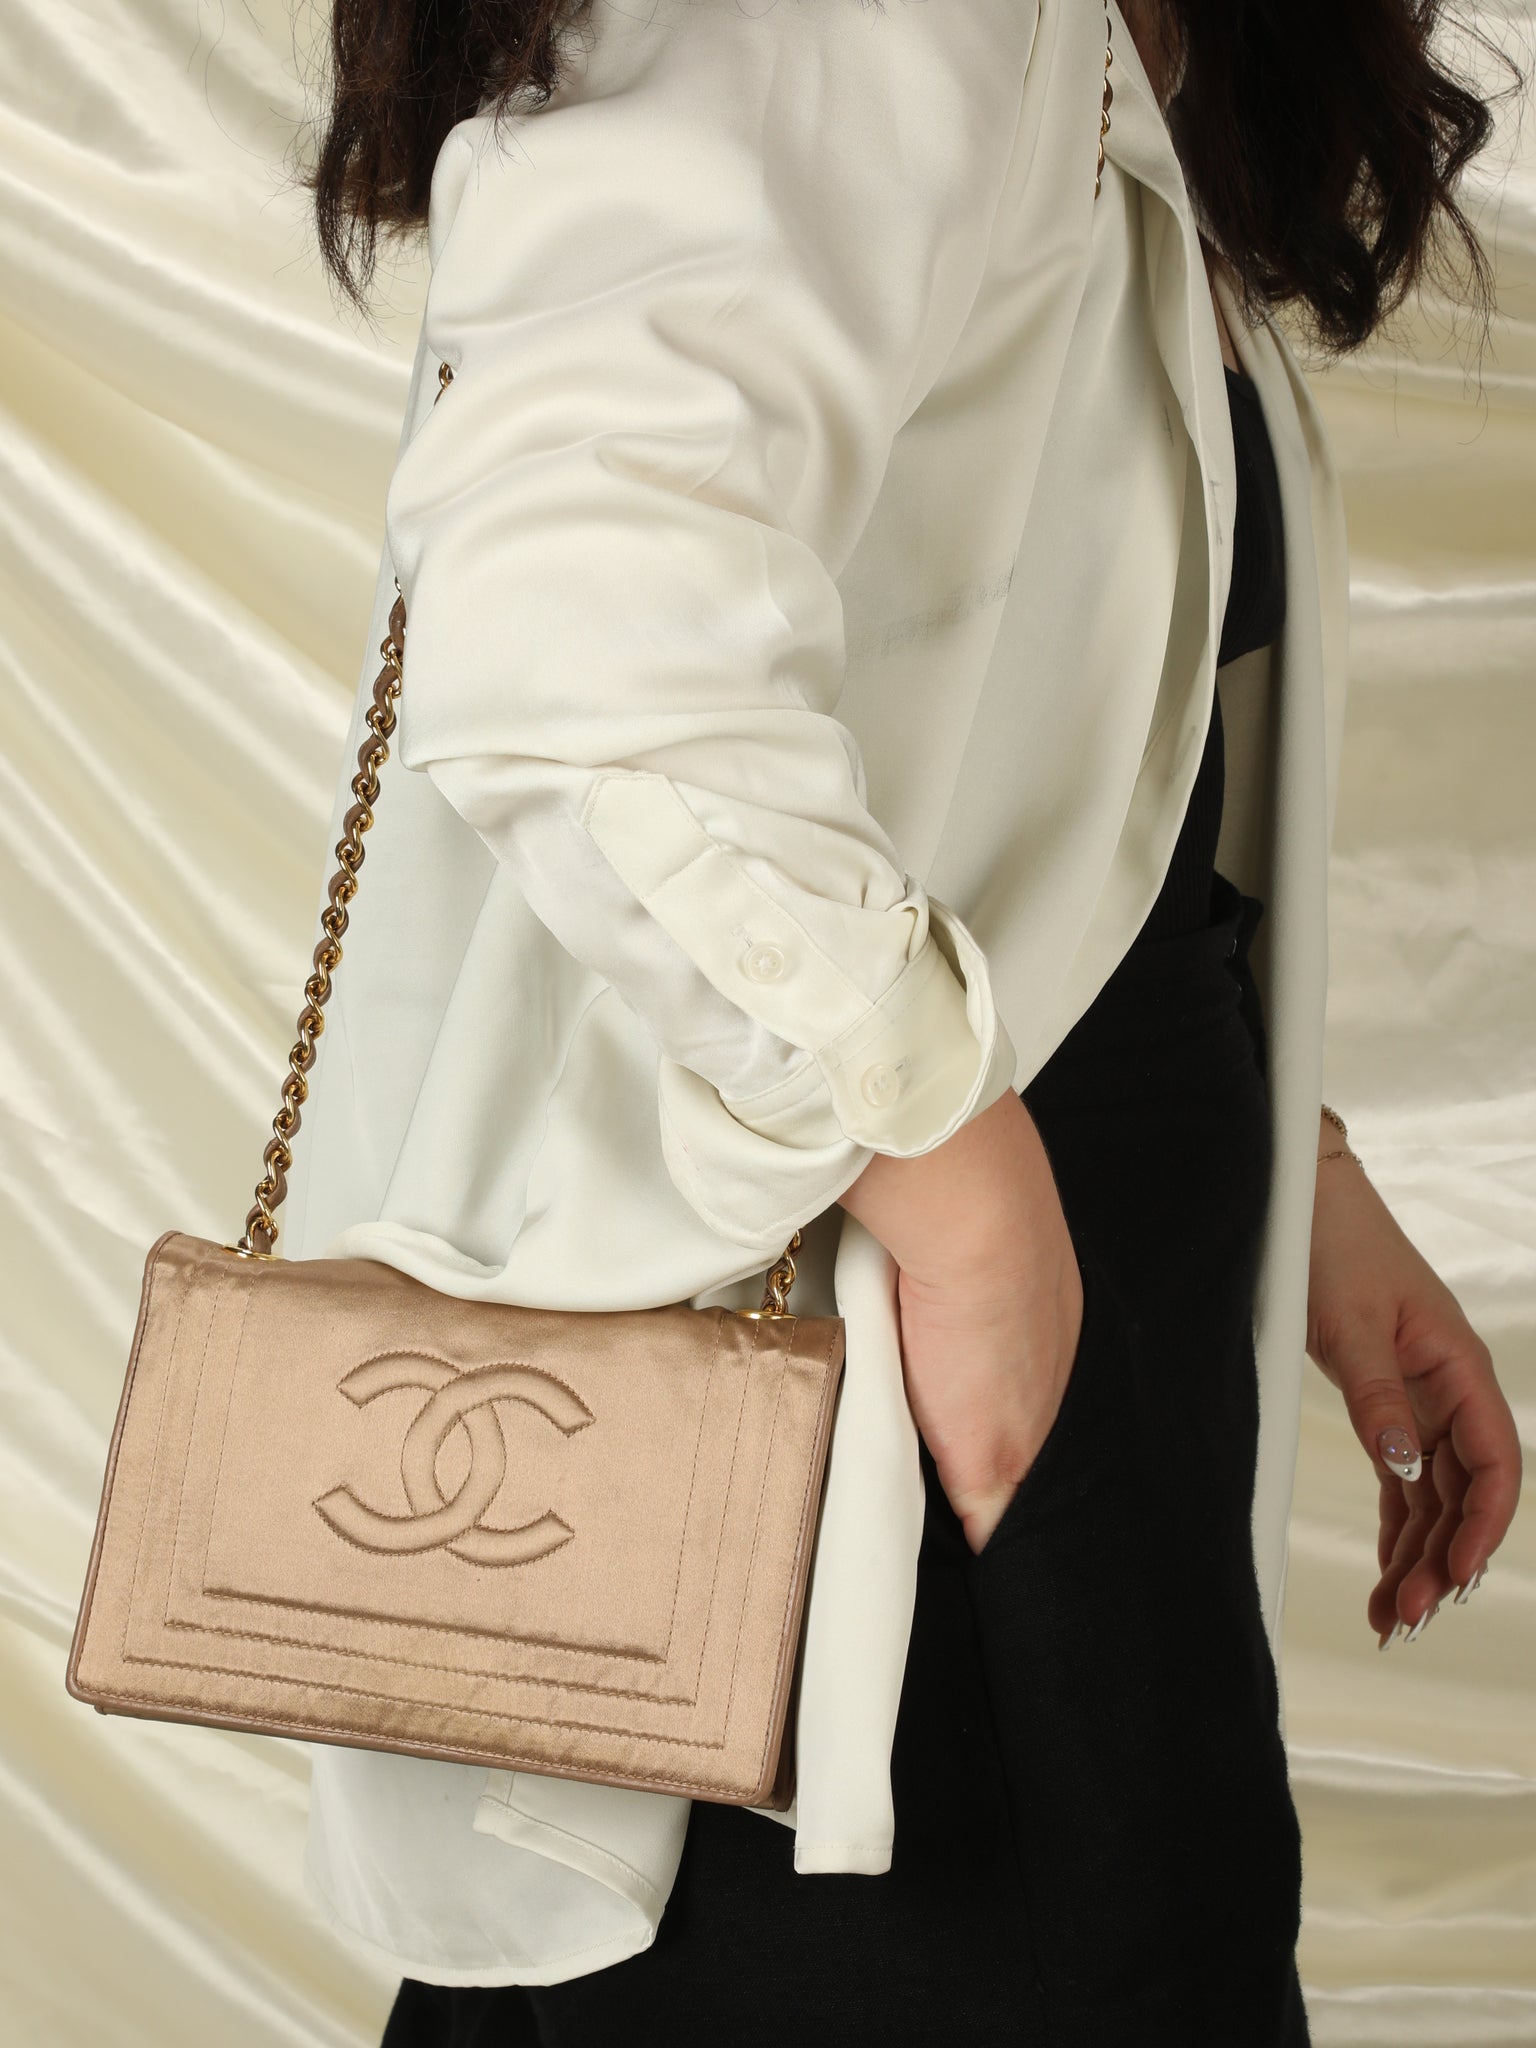 Rare Vintage CHANEL Bag at Rice and Beans Vintage